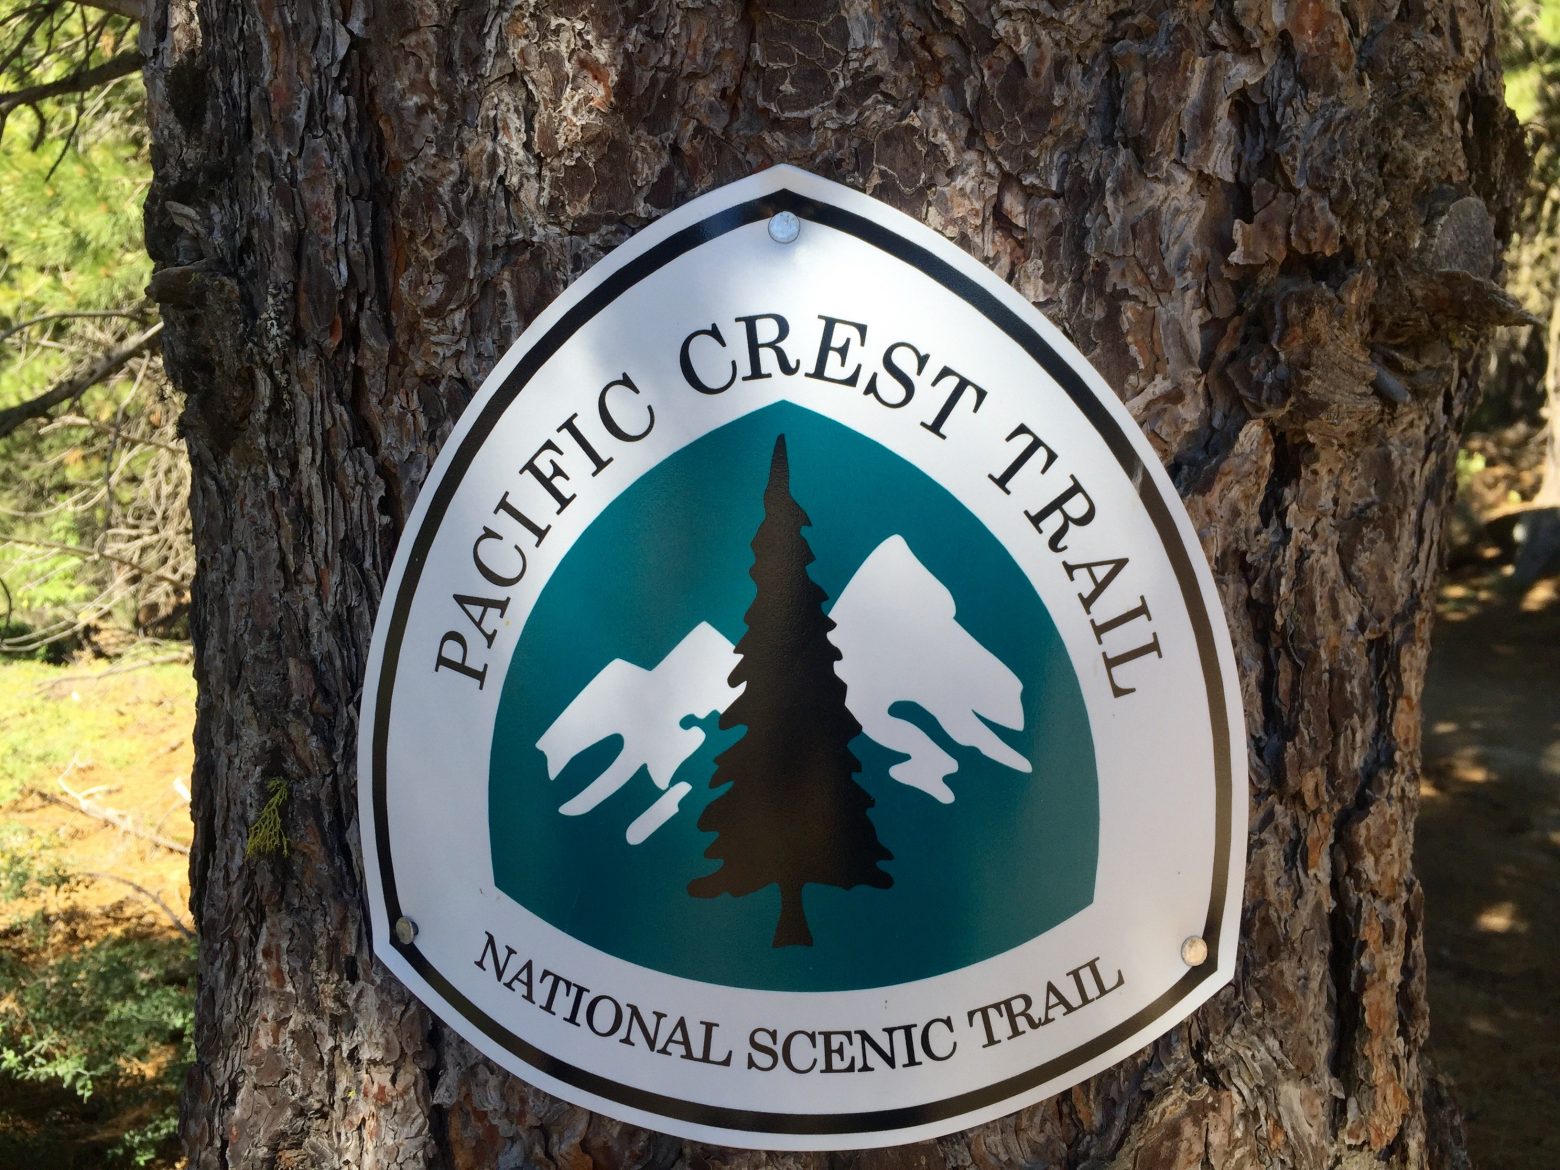 Trail marker with new PCT logo